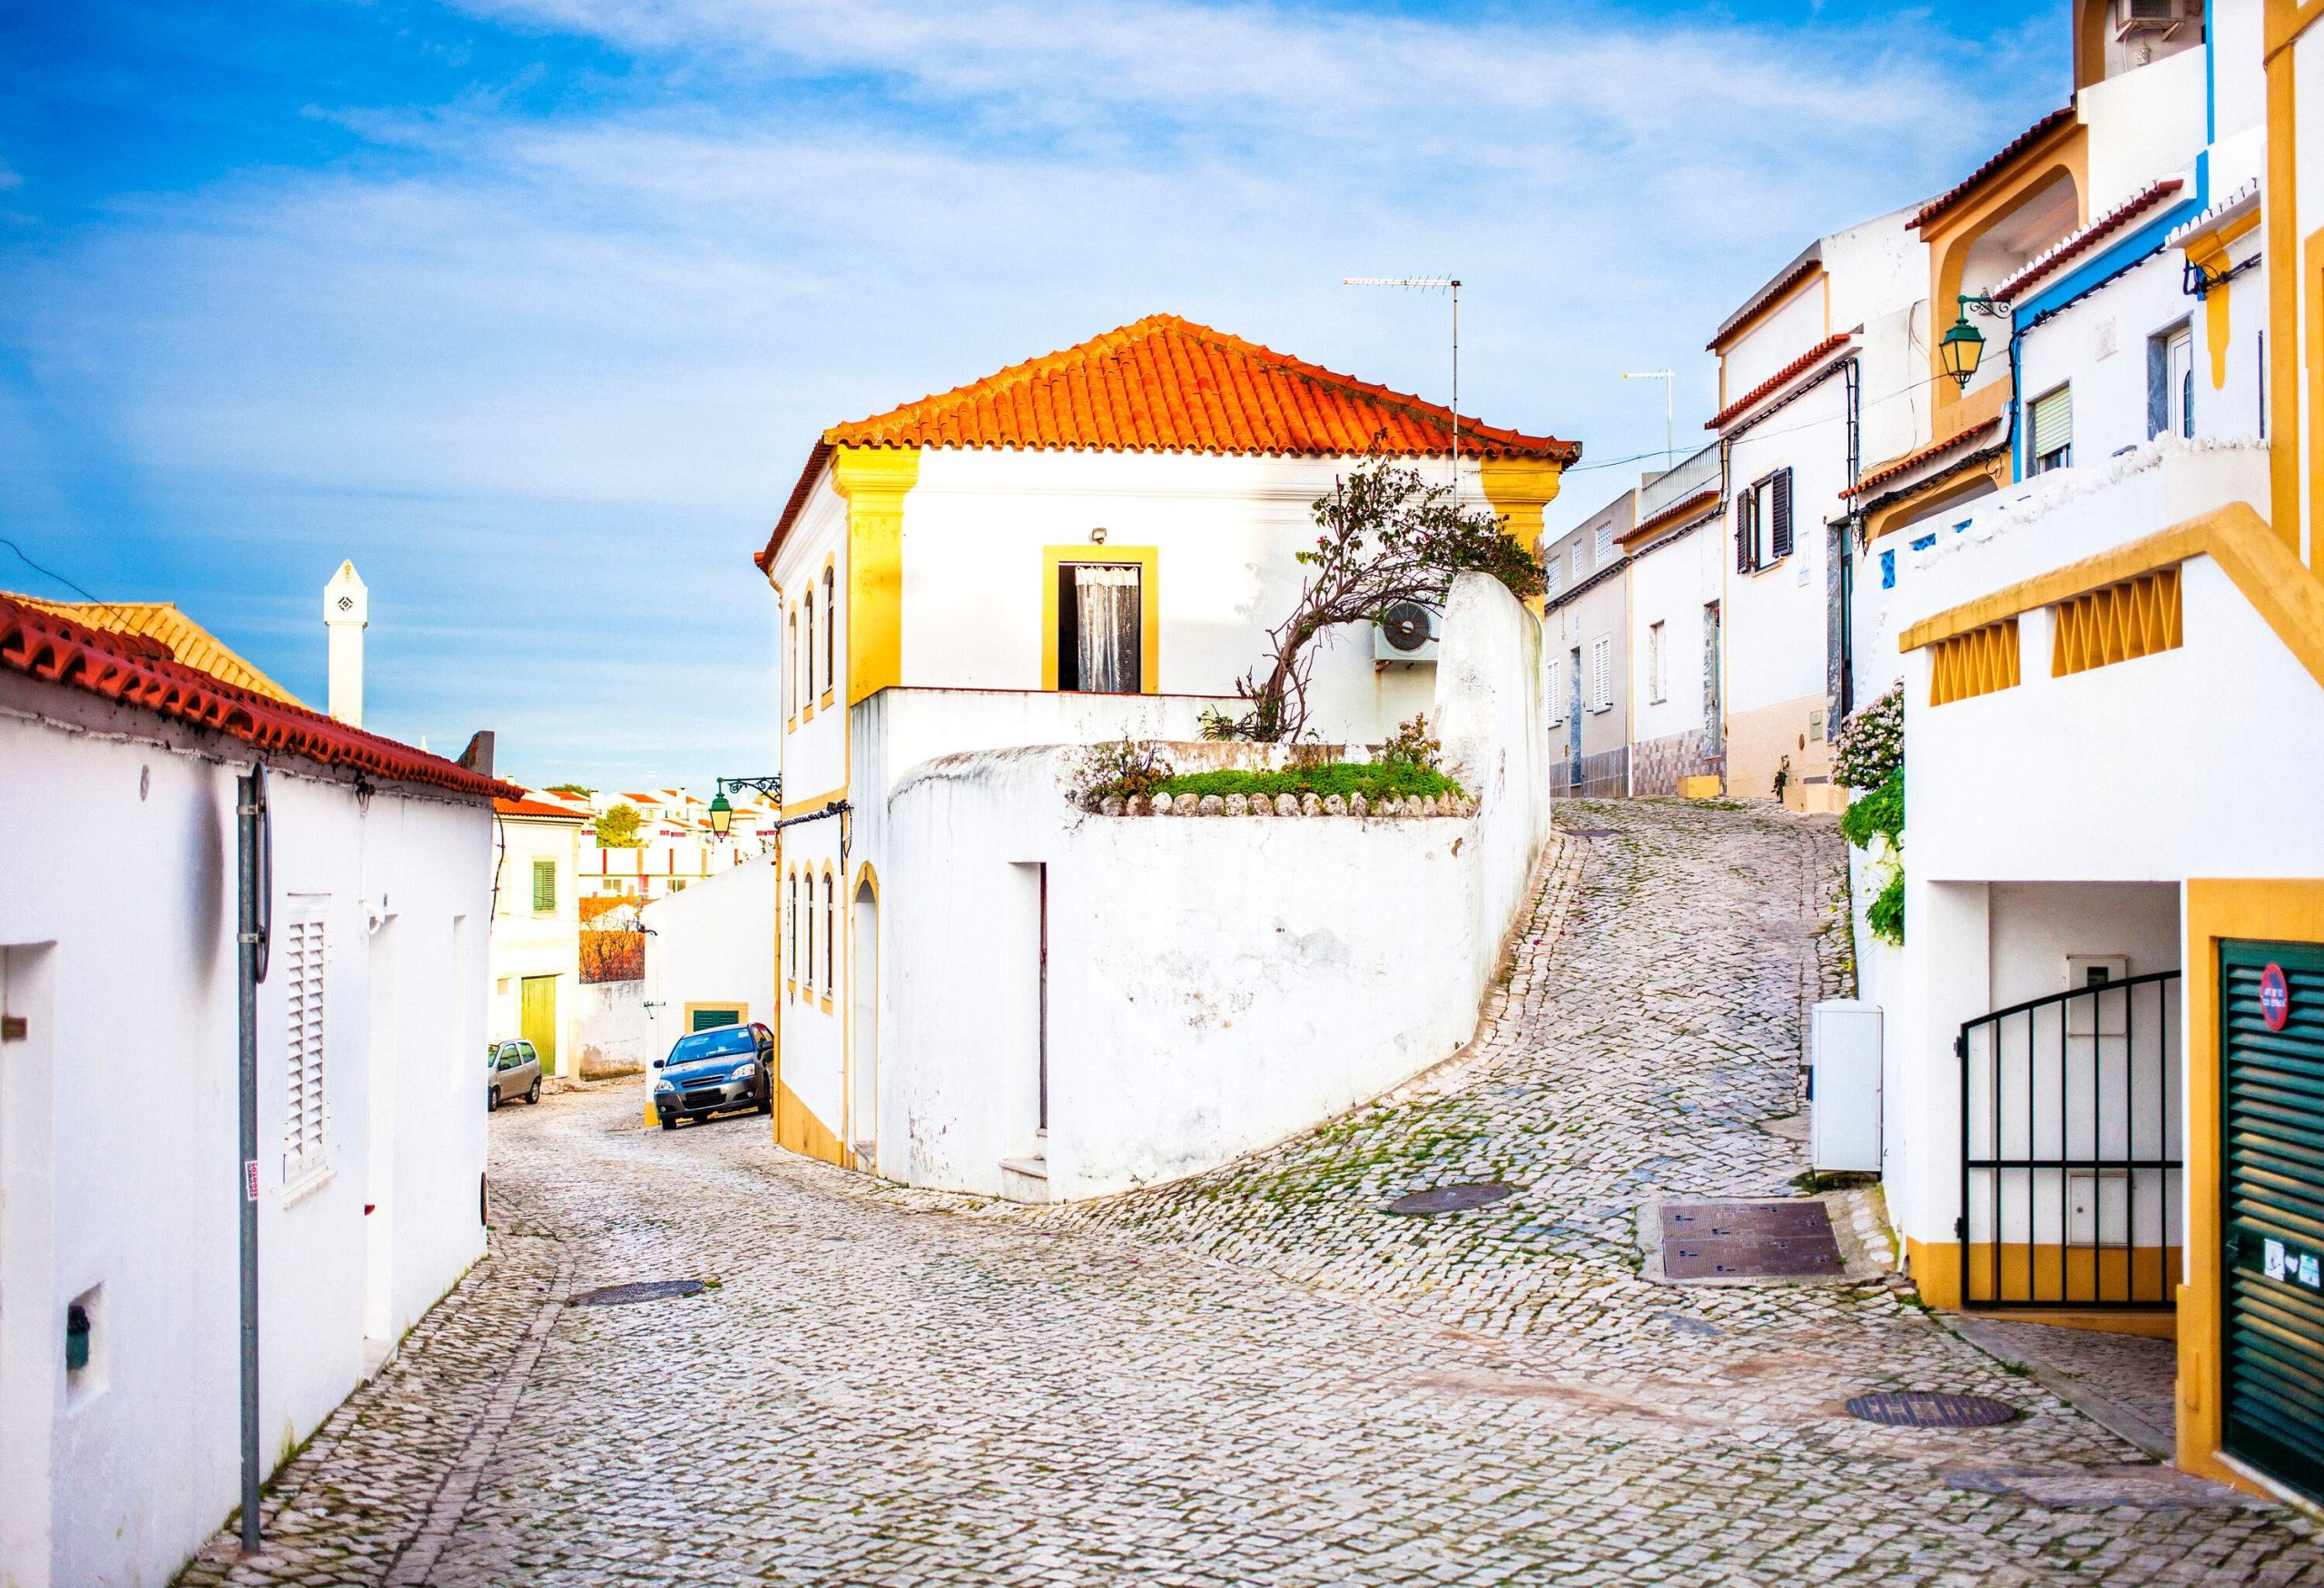 A village with narrow and steep cobblestone lanes surrounded by whitewashed houses.